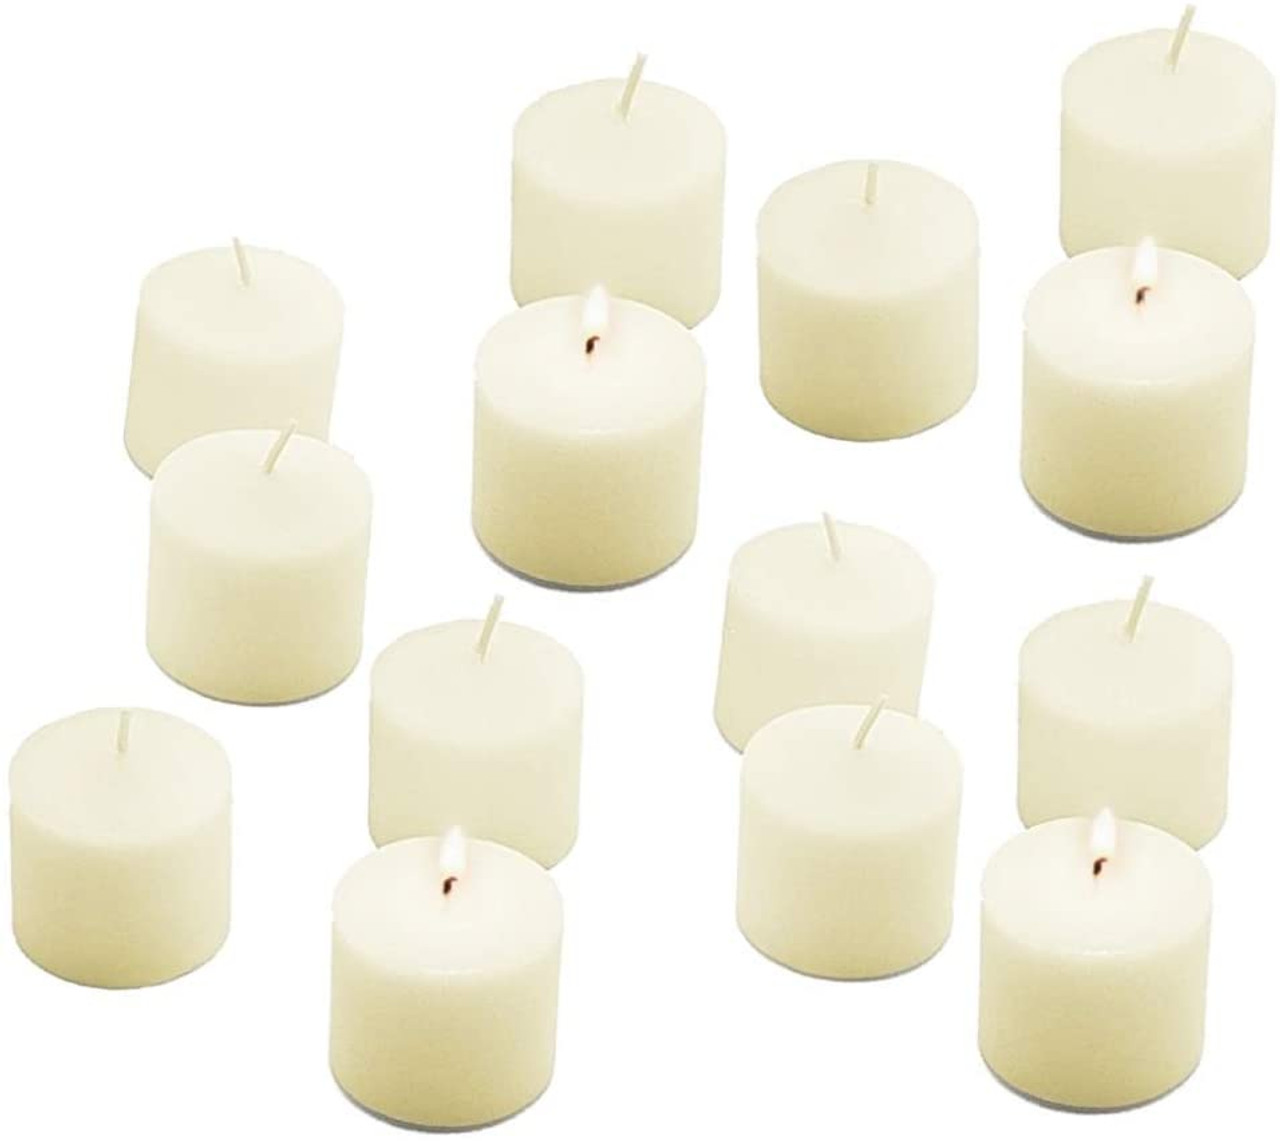 15 Hour Unscented White Emergency And Events Bulk Votive Candles For  Wedding Votives, Luminary Candles, Restaurants, Churches, Bars, Parties,  Spa and